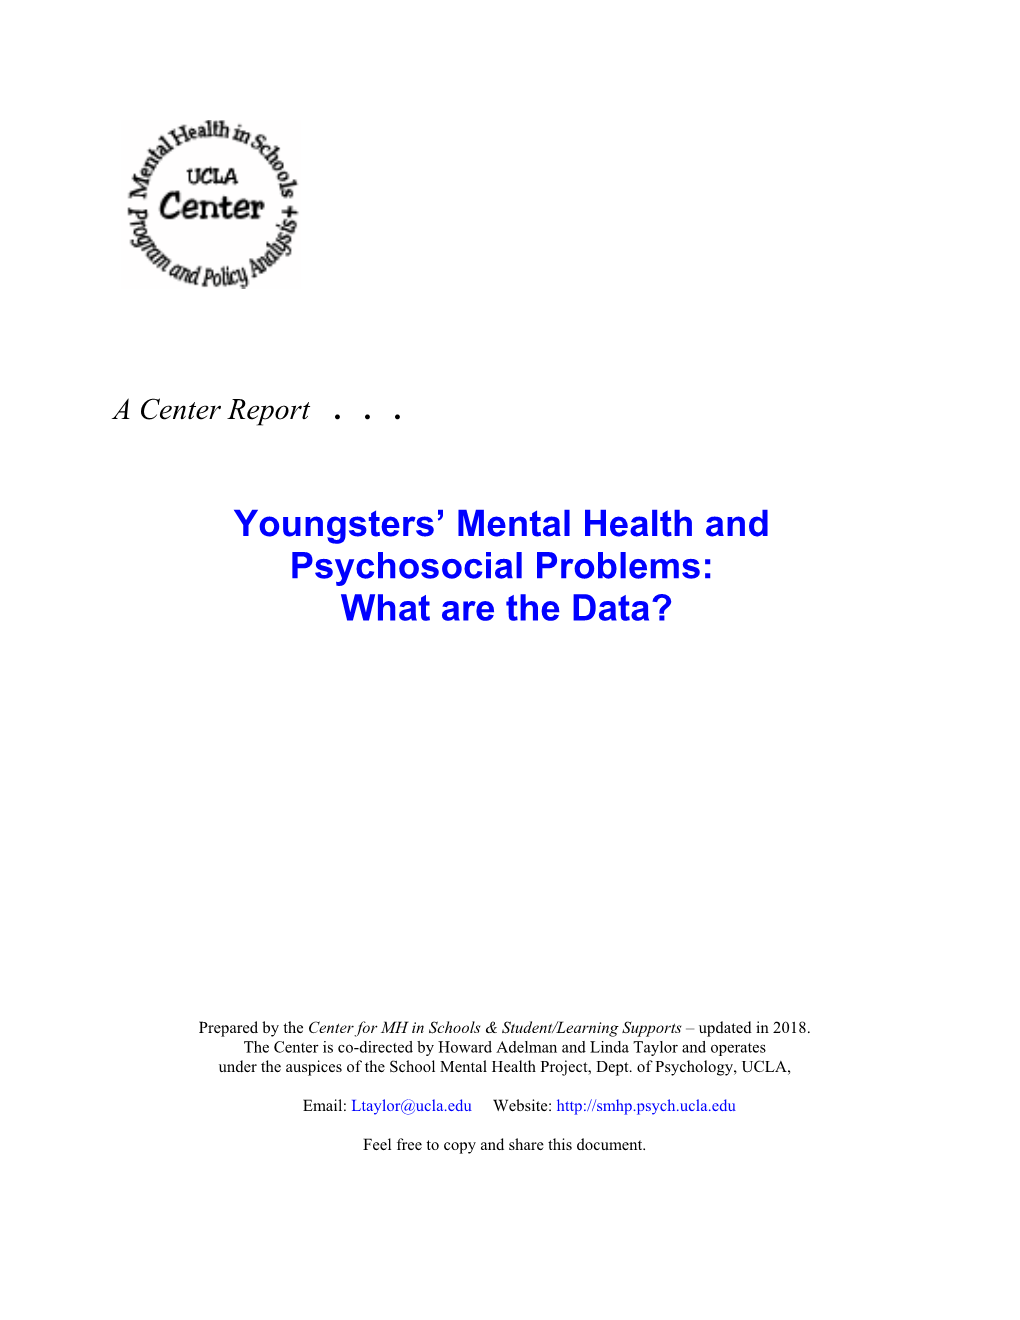 Youngsters' Mental Health and Psychosocial Problems